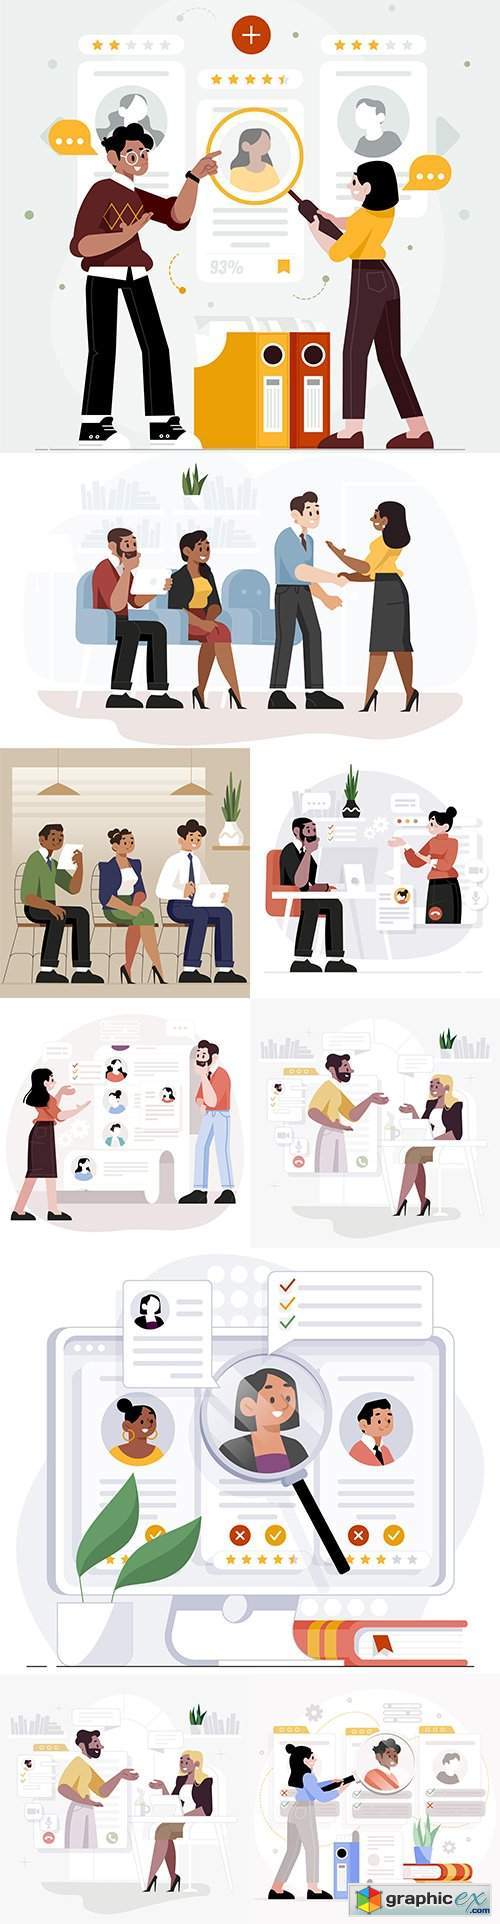 Employee selection and online job interview illustration